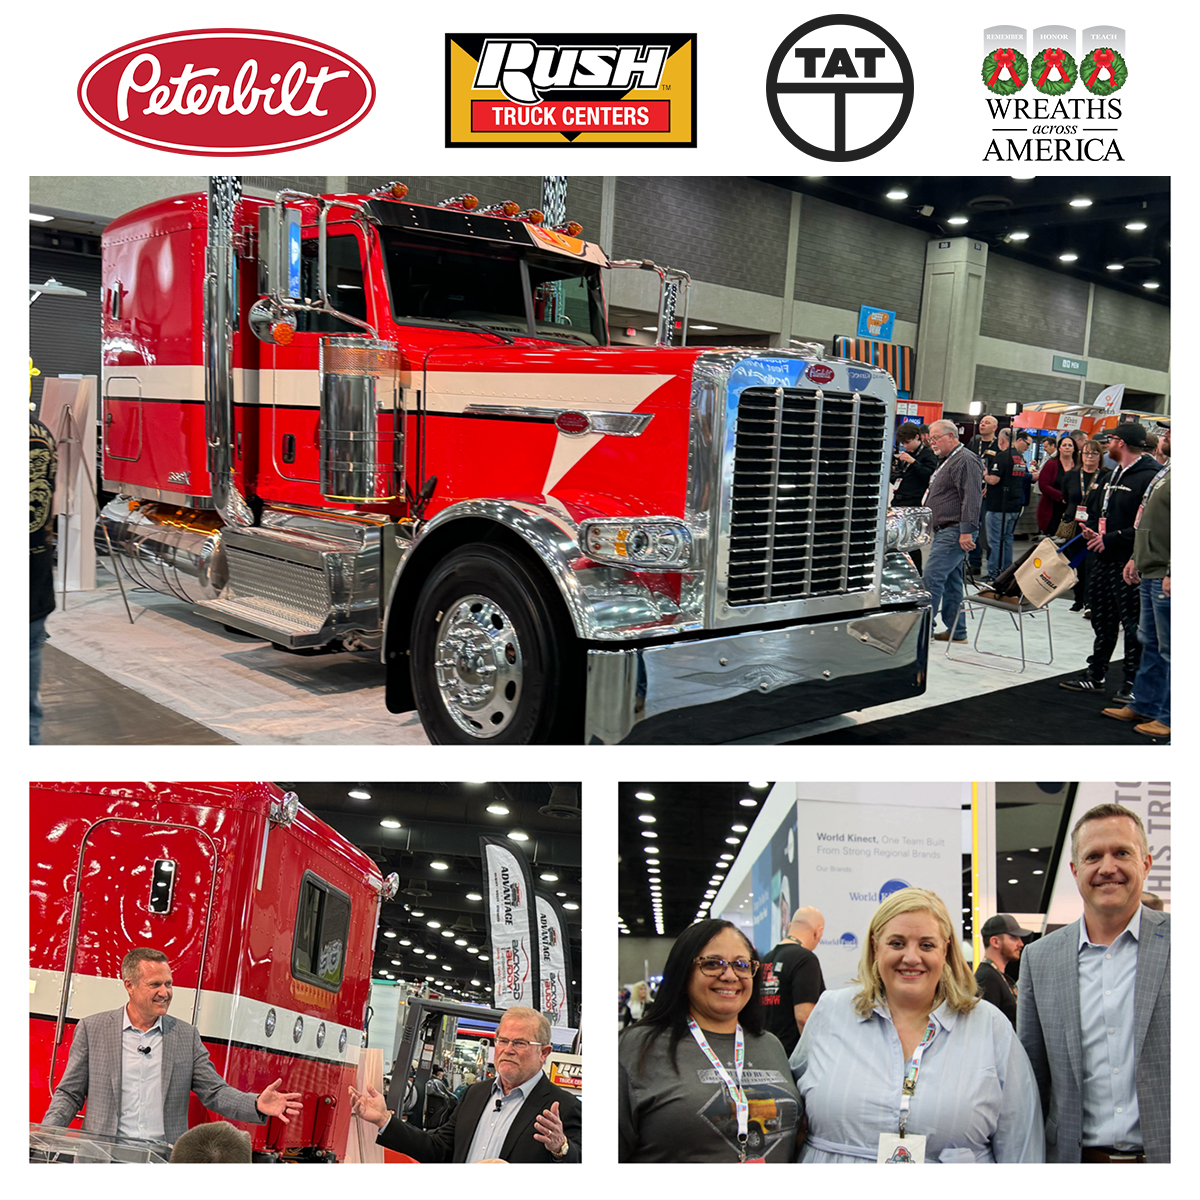 Fueling Hope on the road! Peterbilt and Rush Truck Centers are honored to join forces and contribute to two remarkable charities: Truckers Against Trafficking and Wreaths Across America! Read more: bit.ly/RushModel389 #Peterbilt #MATS #Peterbilt389